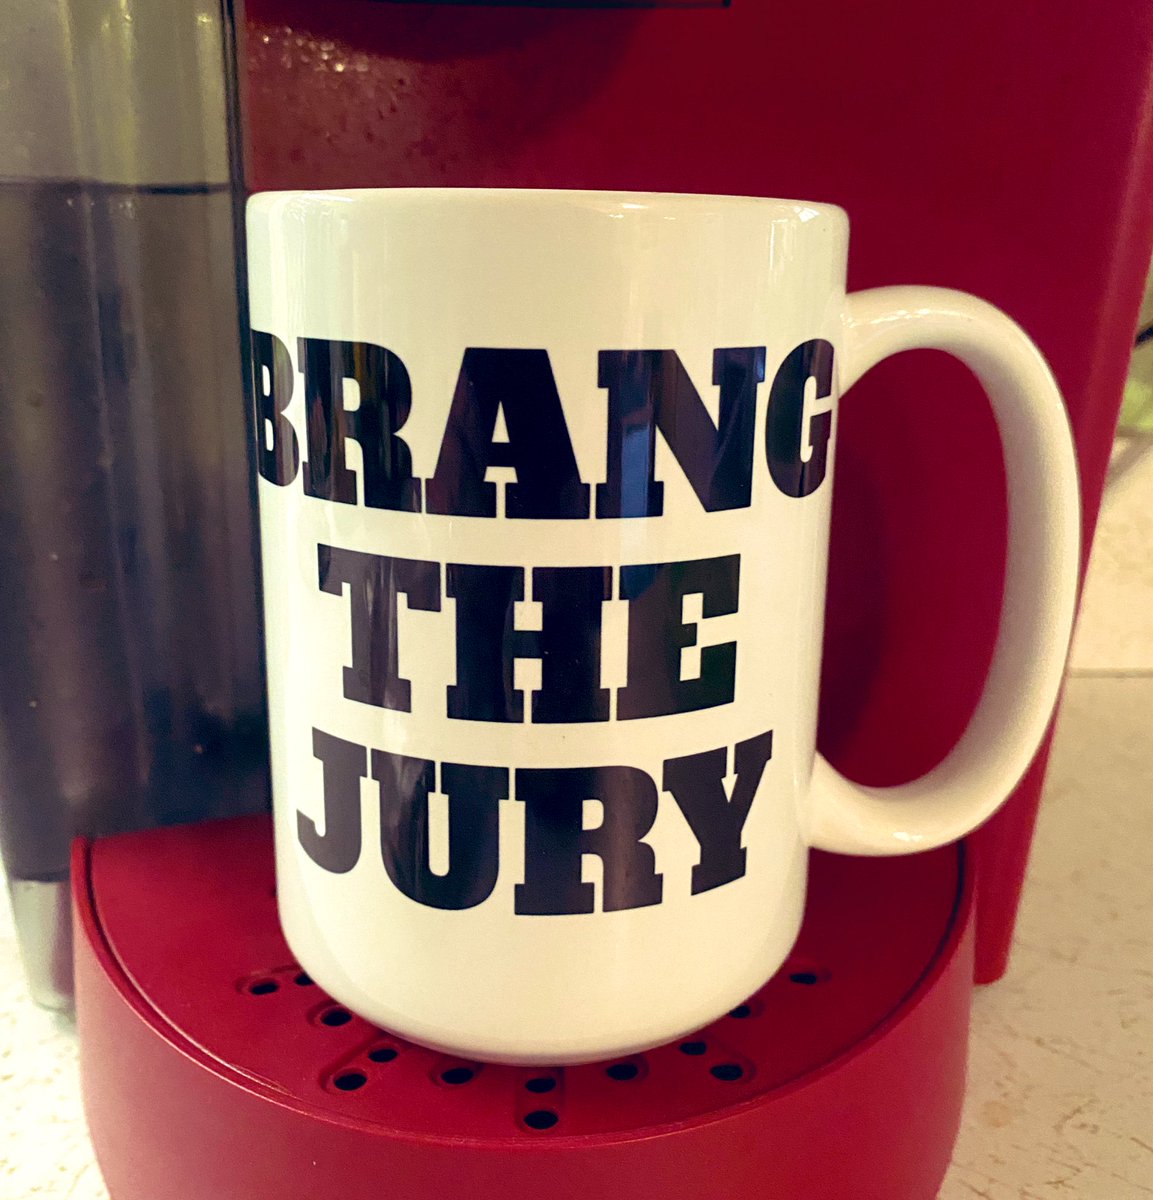 Morning Bo’s…it’s coffee time!! 

Let’s all have a beautiful day ☀️ 

#humpday #jaybonation #merchalert #brangthejury 

@theshamingofjay @Shannygram 😉👍🏻